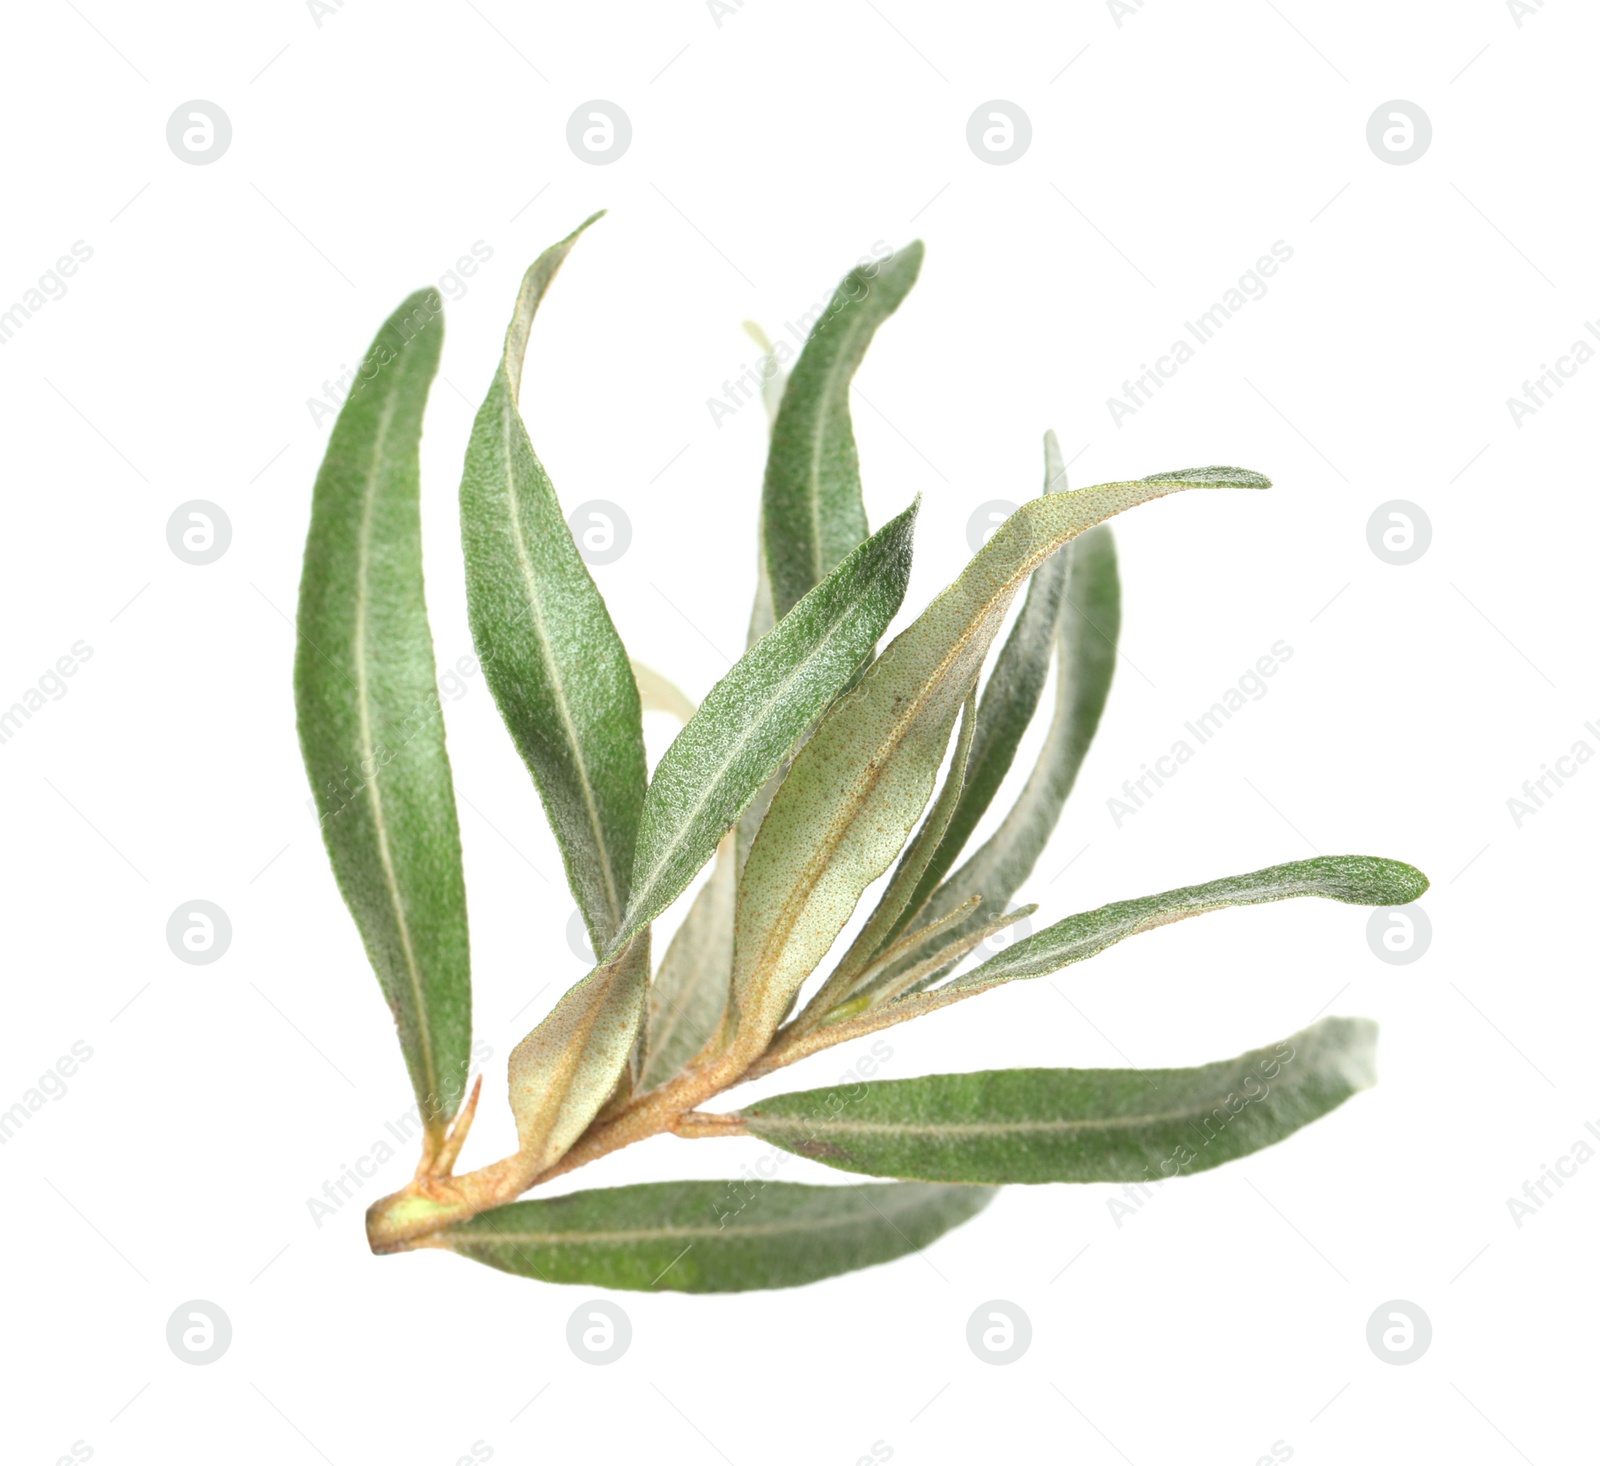 Photo of Sea buckthorn twig with leaves isolated on white